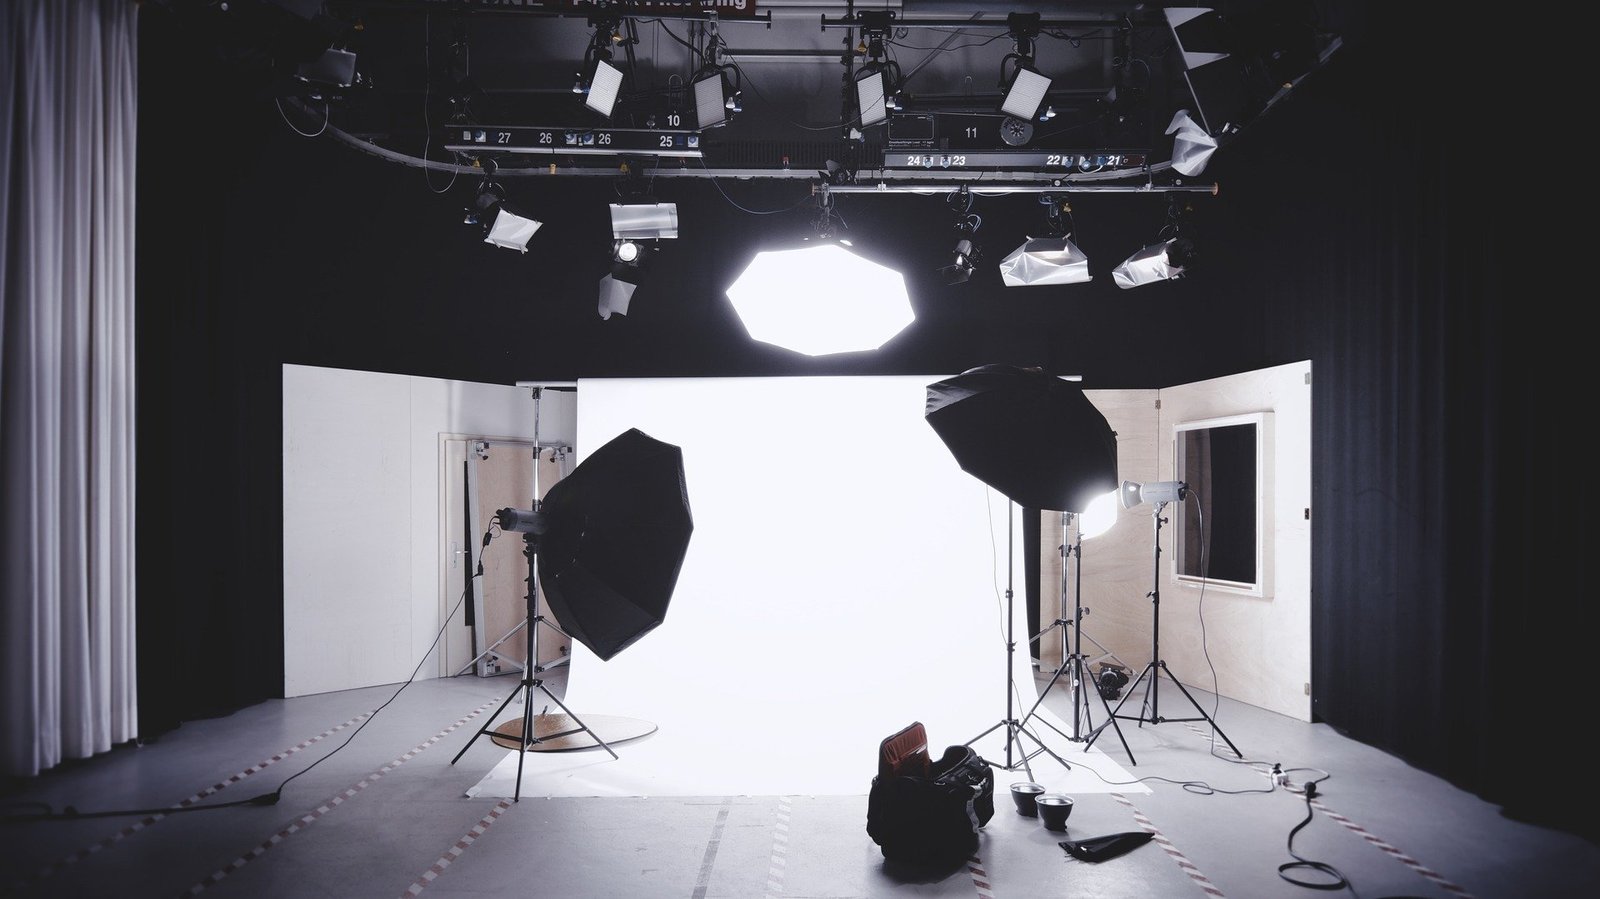 Image of video production set